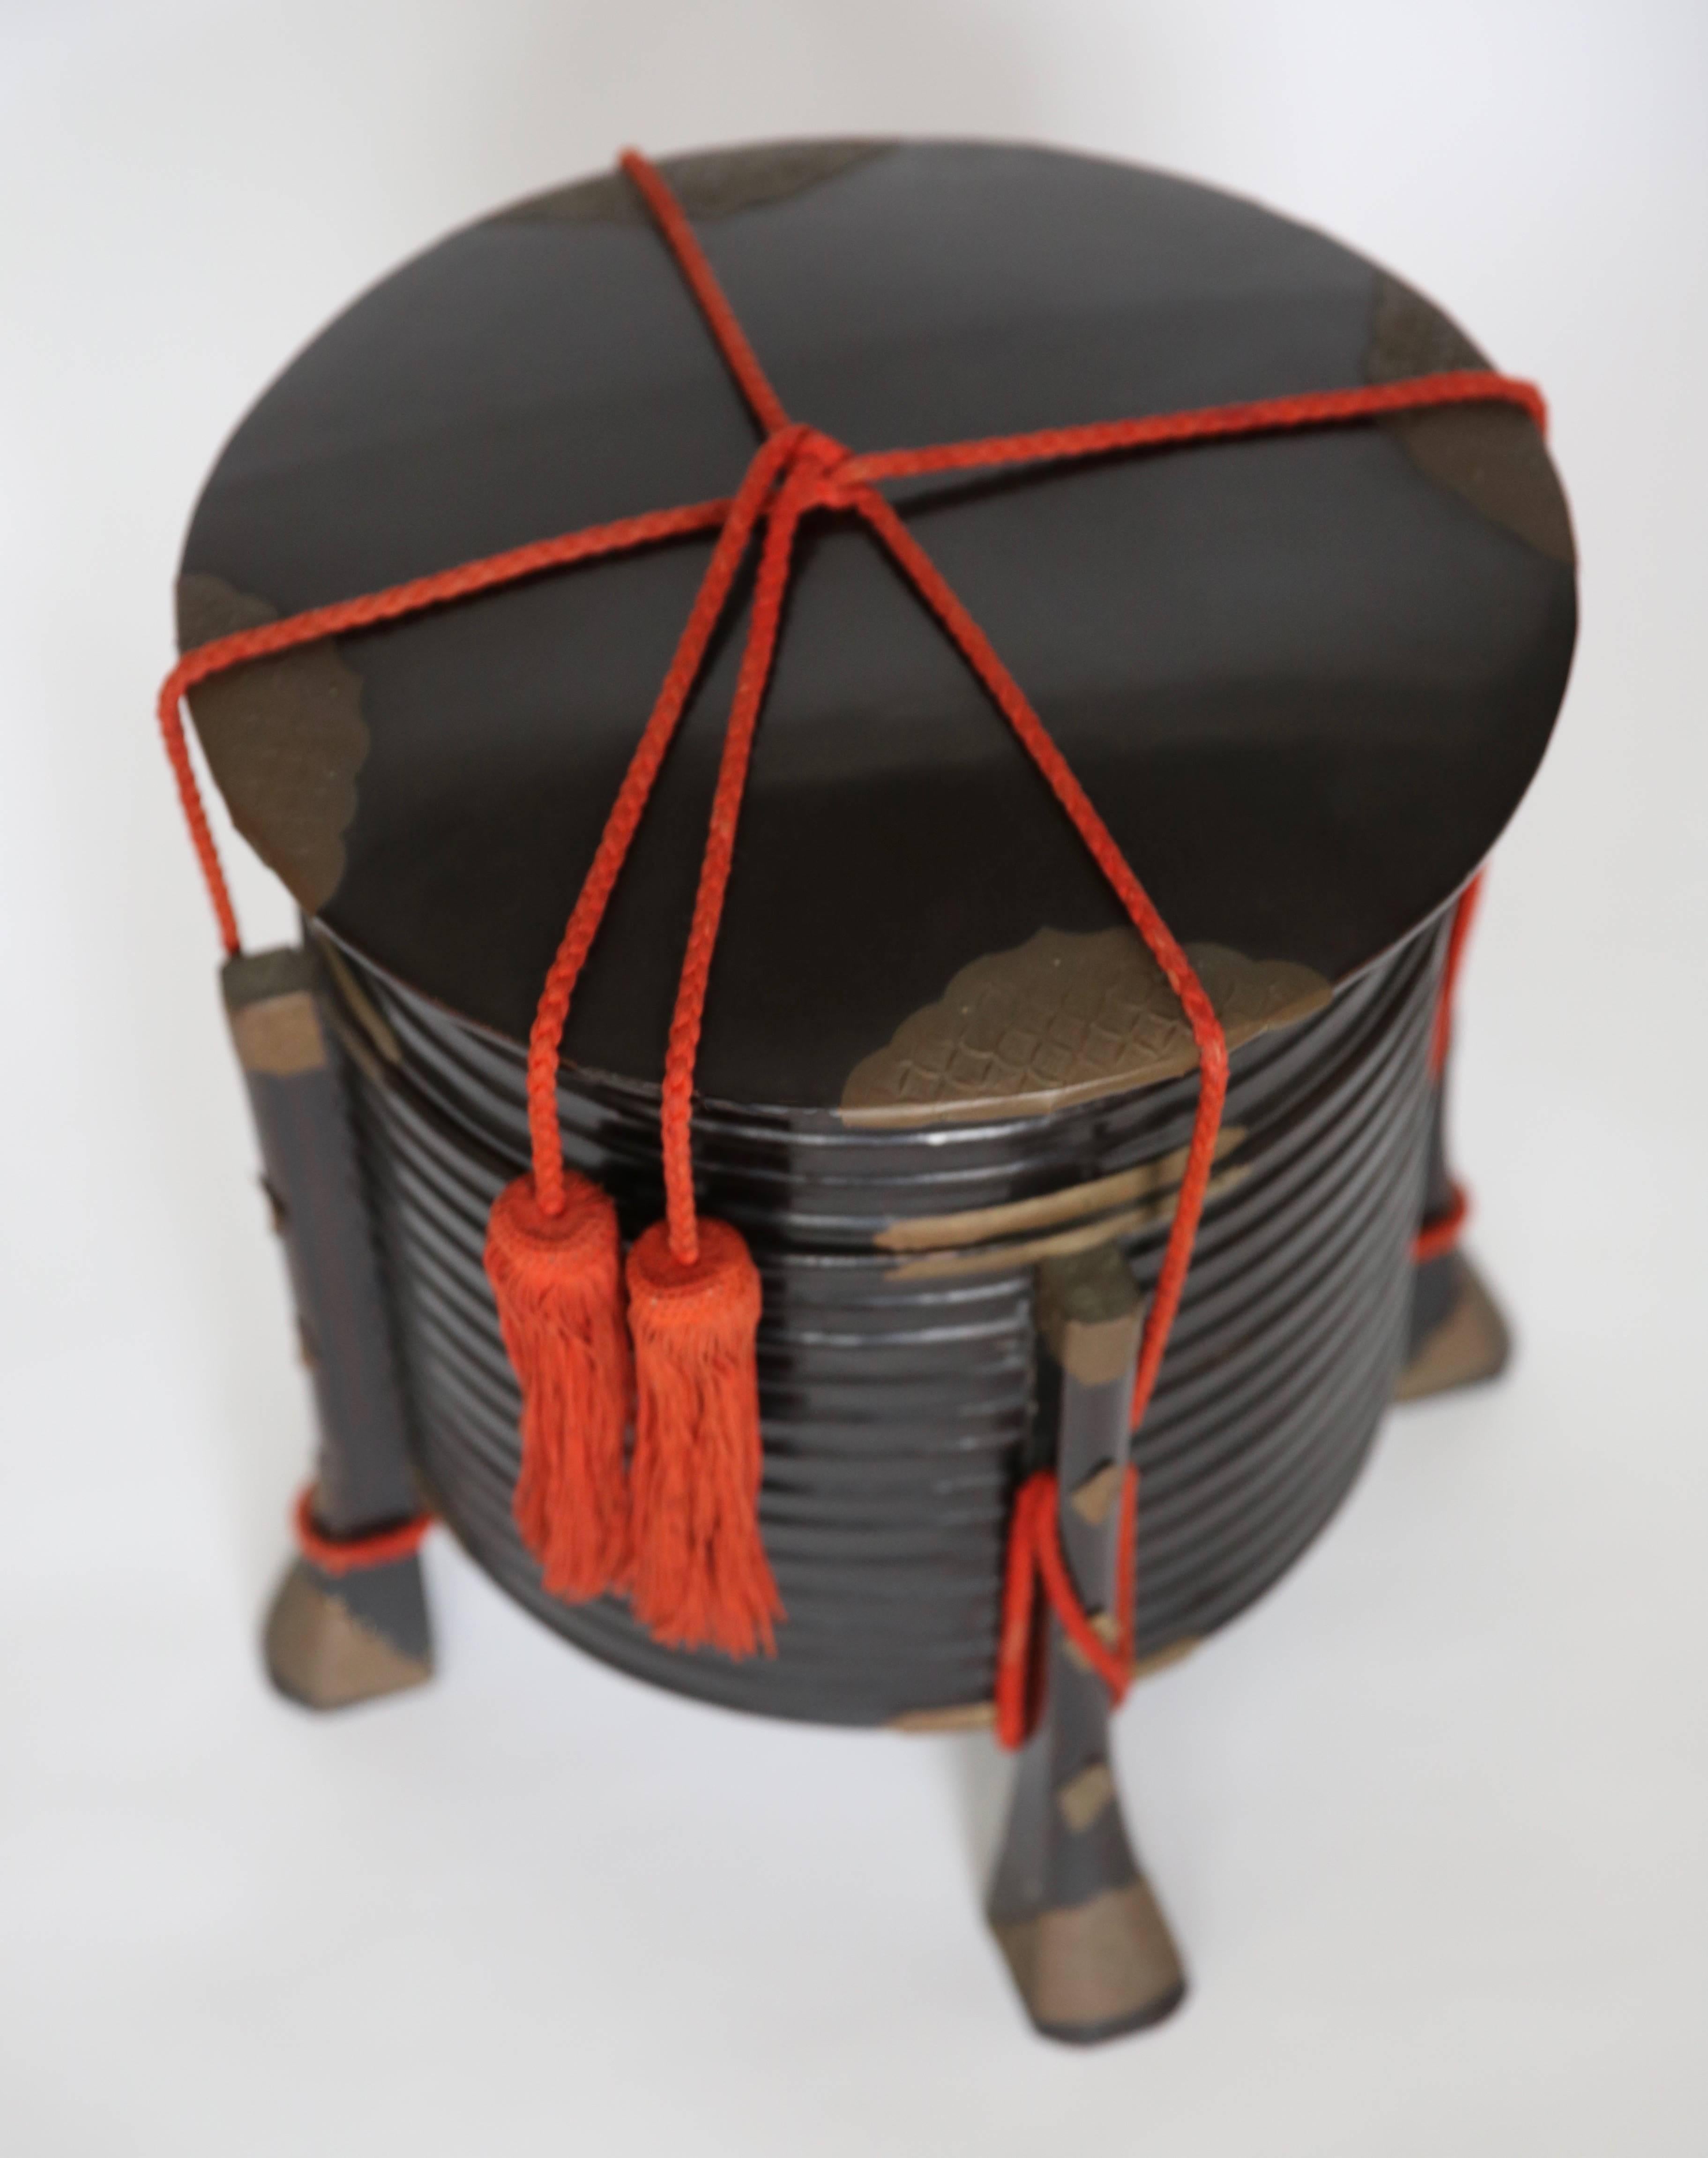 A Meiji period Japanese black lacquer hat box with red rope and chiselled copper decor details.
Japanese late Meiji period Hokkai box or hat box. 
The body shaped as a series of stacked rings. Four legs run up the sides of the body, and are